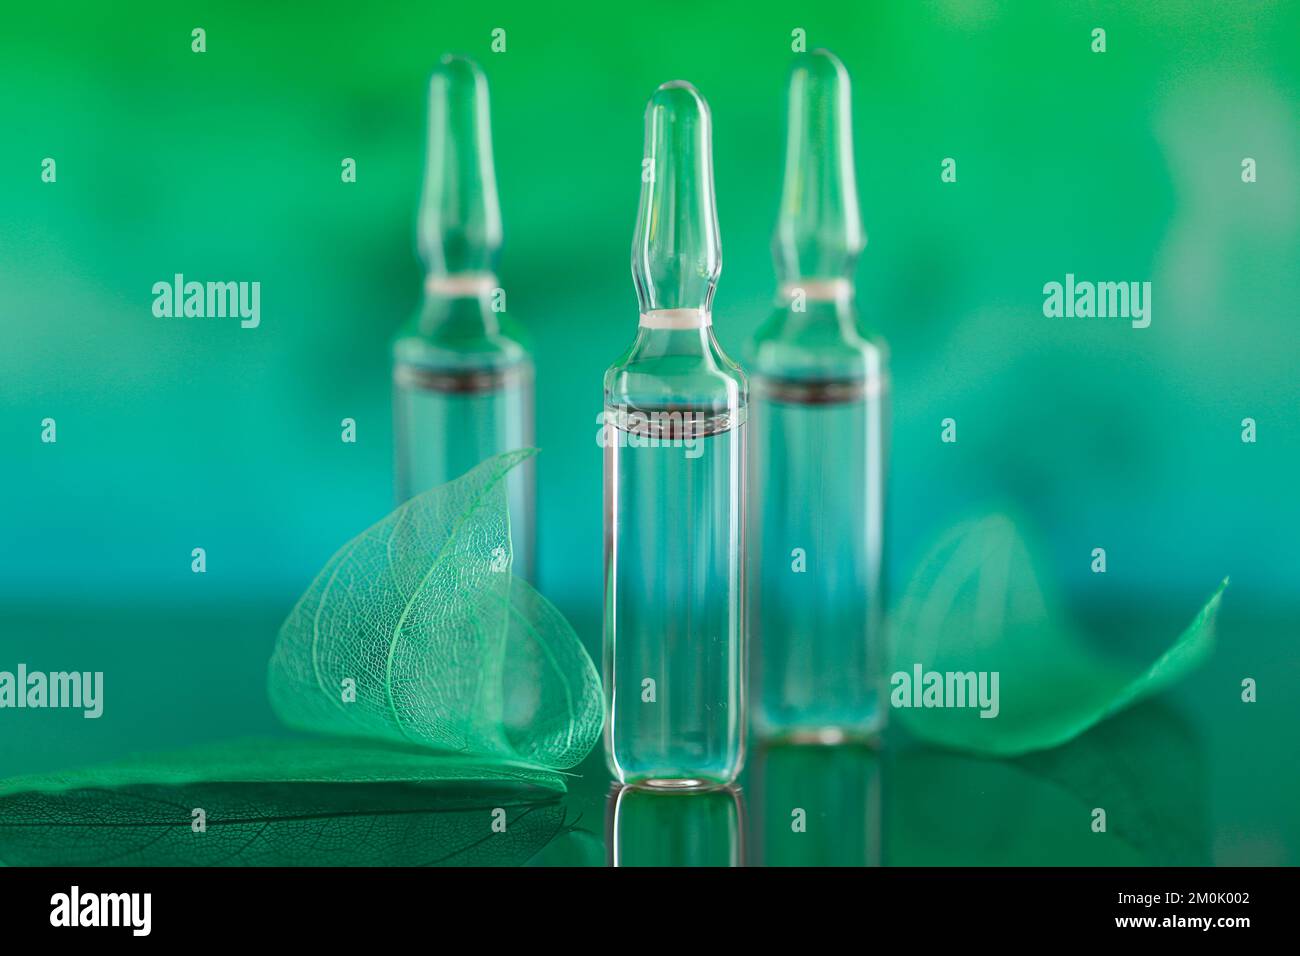 ampoules and green skeletonized leaves on a turquoise blurred background.Mesotherapy and dermabrasion serum in ampoules.Hyaluronic acid in ampoules. Stock Photo